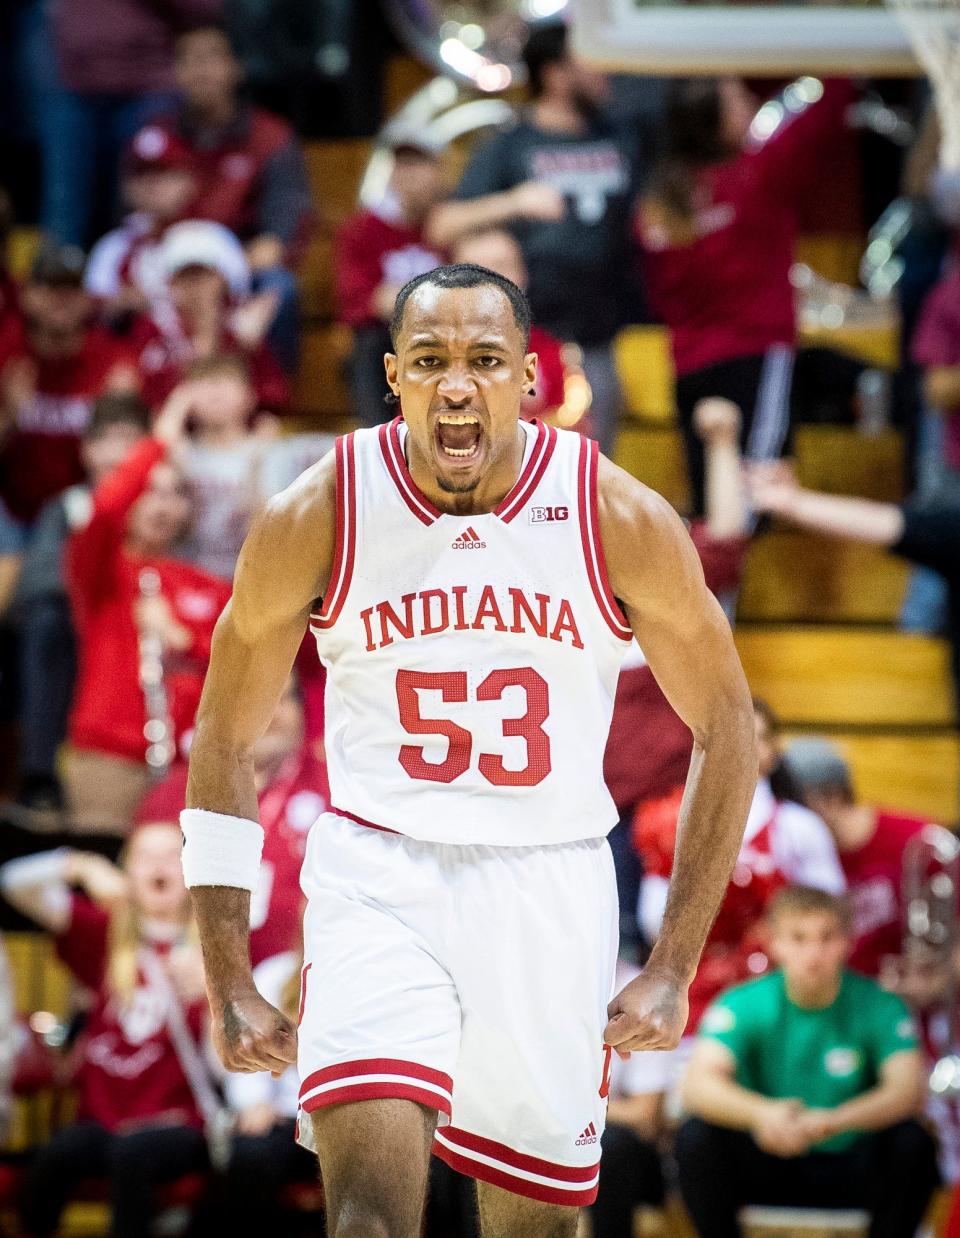 Indiana's Tamar Bates (53) celebrates after making a three-pointer during the Indiana versus Kennesaw State men's basketball game at Simon Skjodt Assembly Hall on Friday, Dec. 23, 2022.